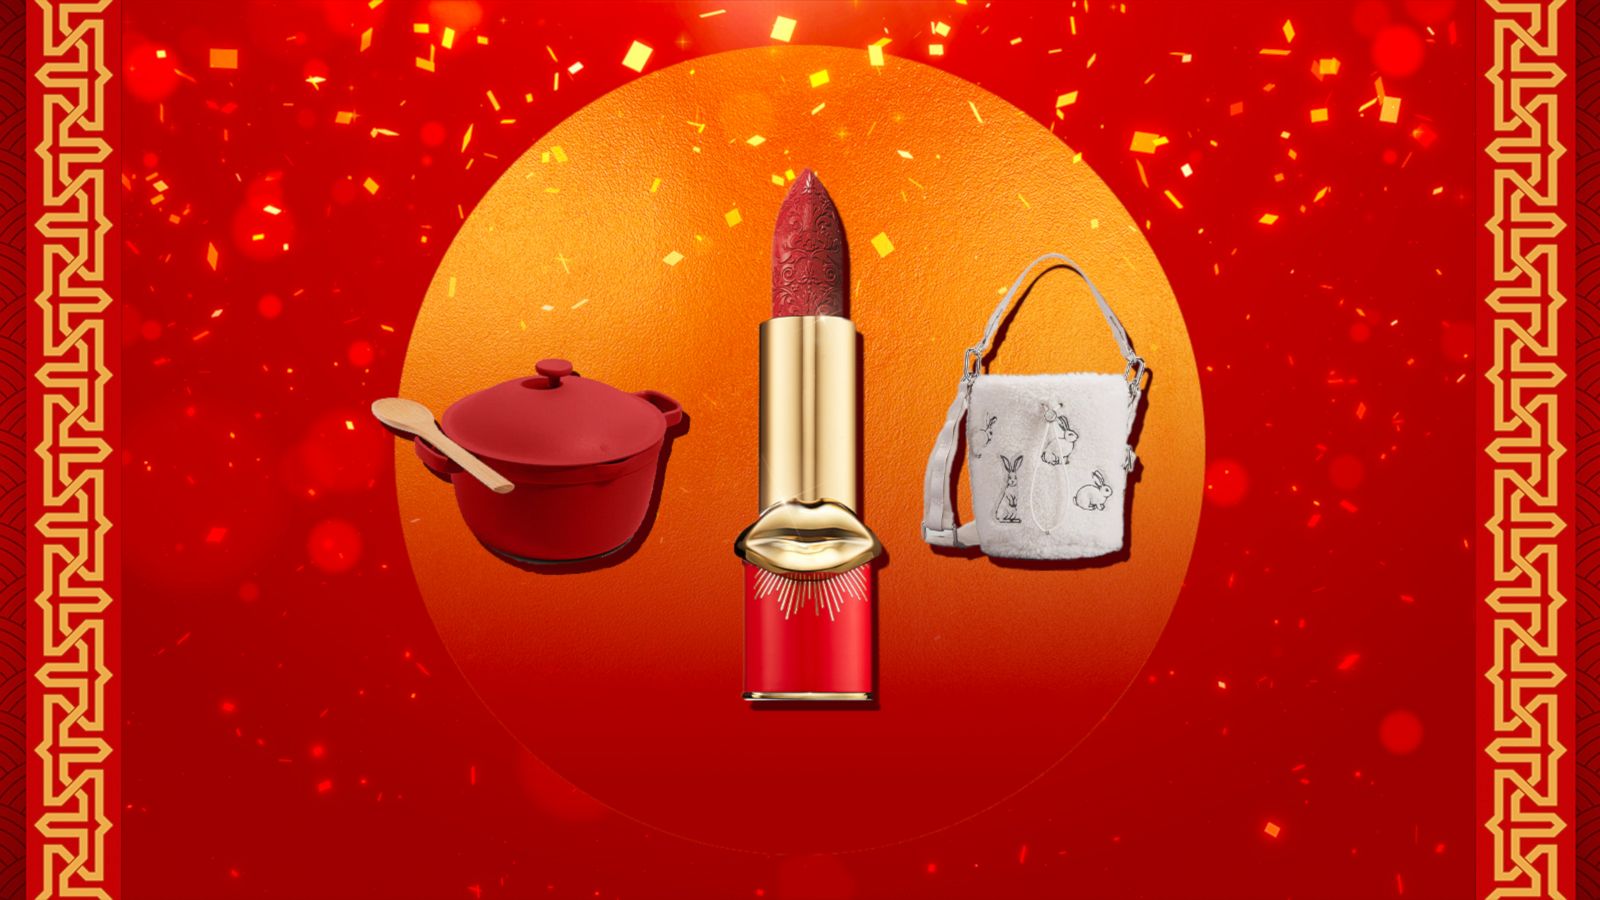 Celebrate the Year of the Rabbit with these Lunar New Year-themed buys -  Good Morning America